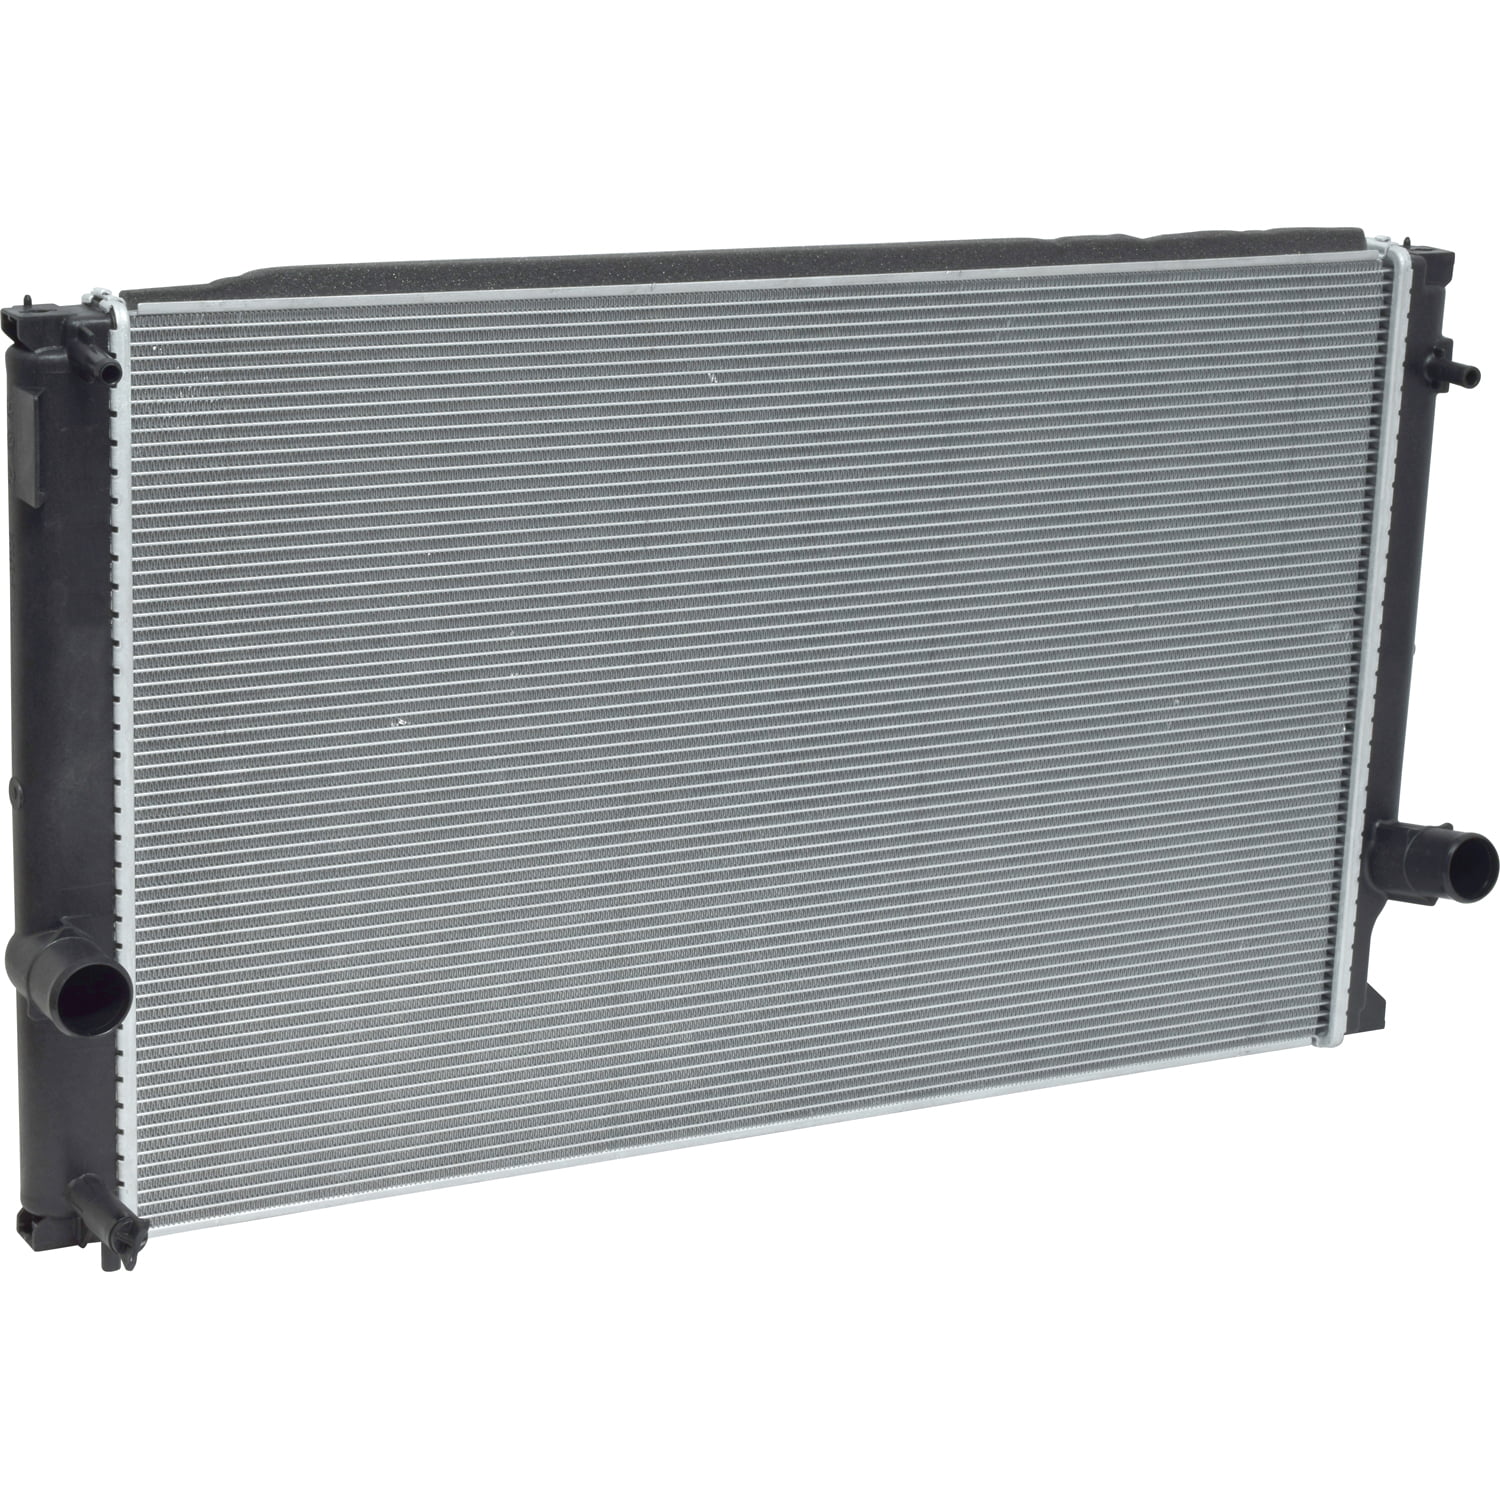 New Radiator for NX200t NX300